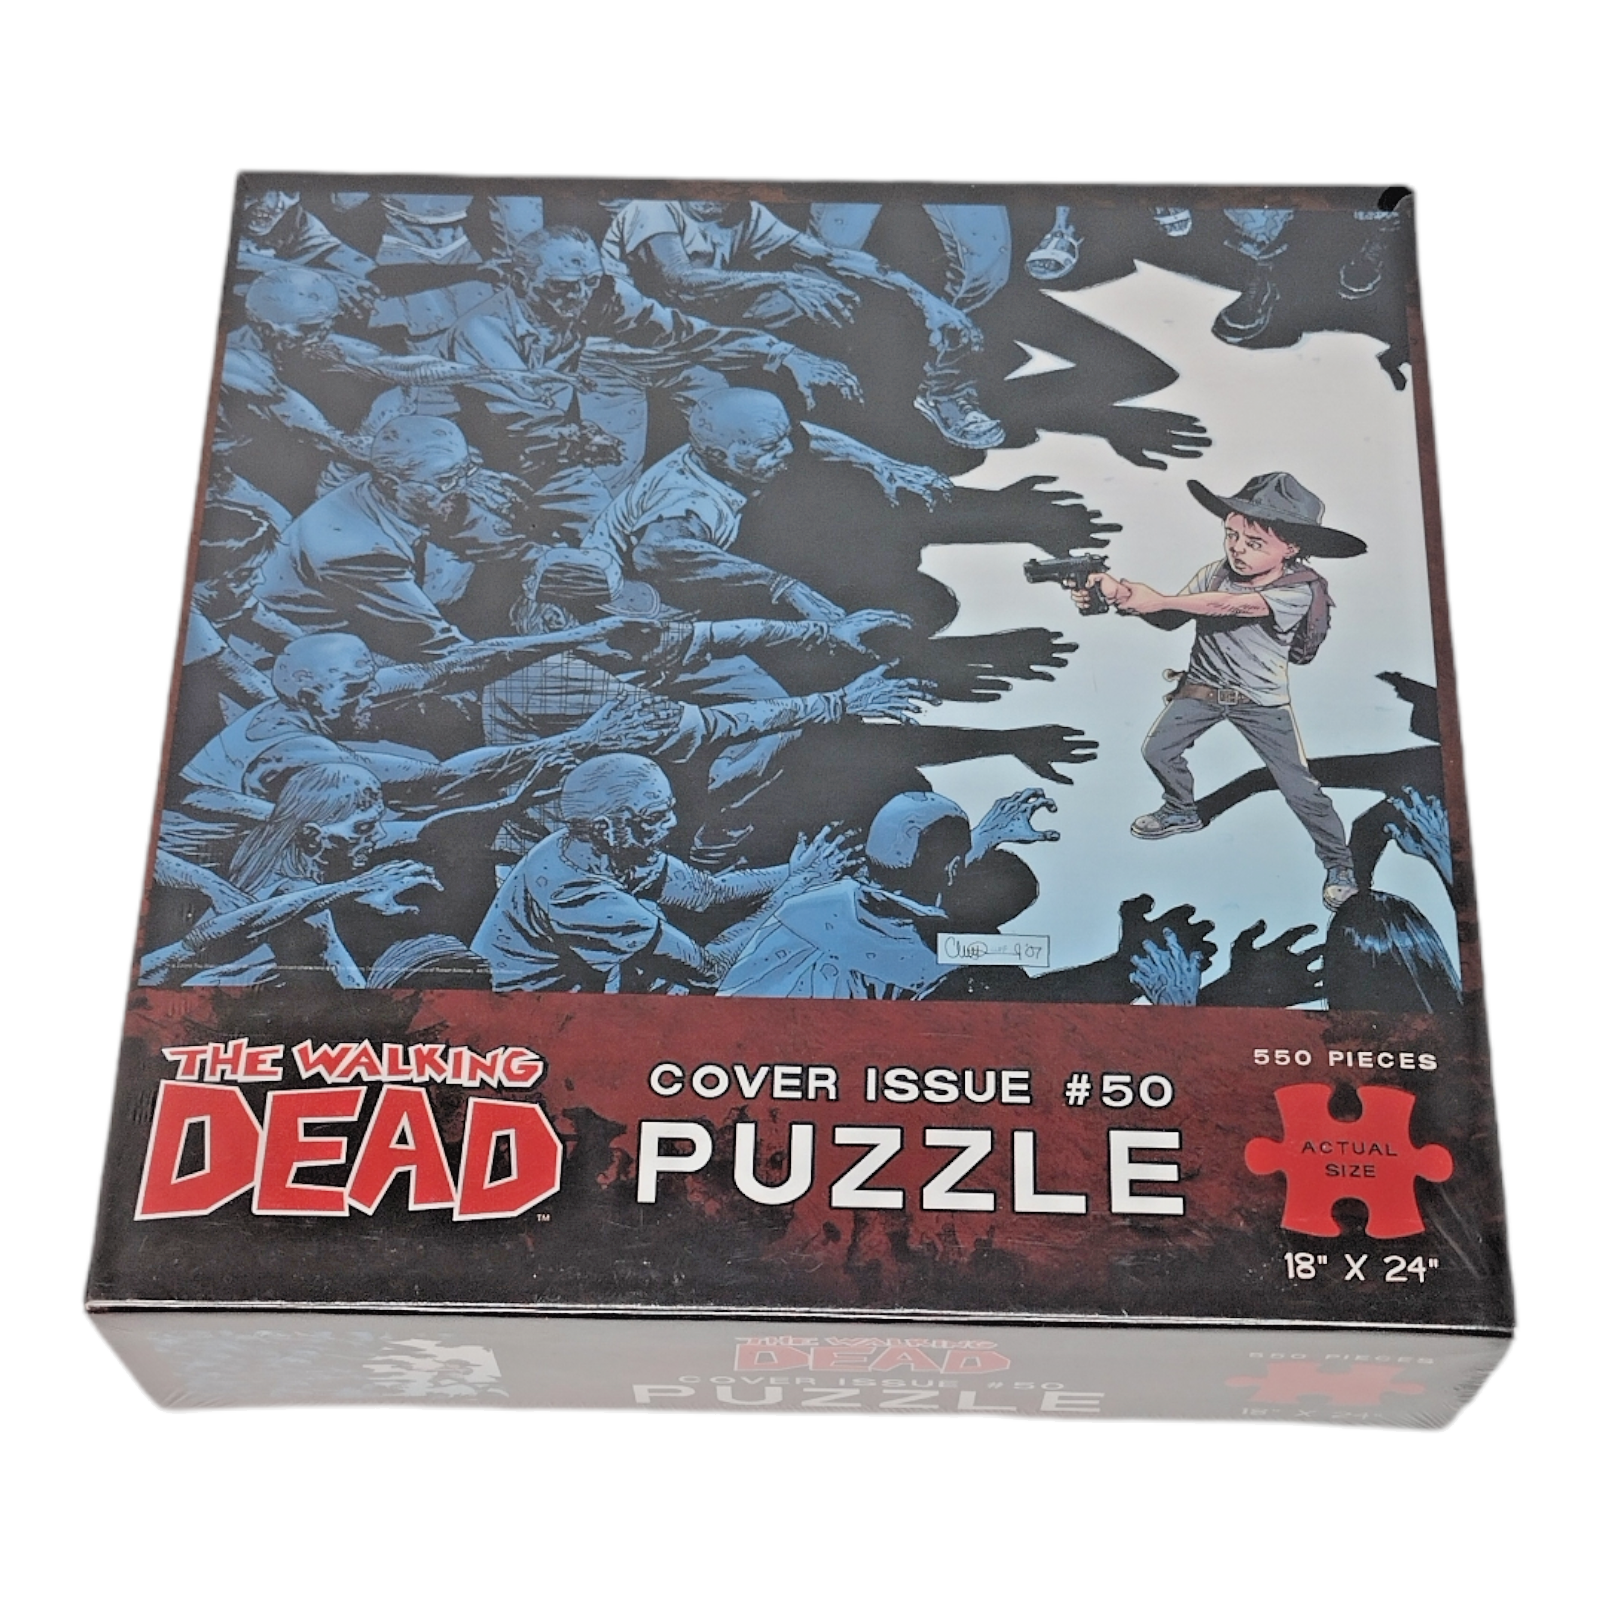 The Walking Dead Issue #50 Cover Art 550 Piece Jigsaw Puzzle USAopoly 2016 - $13.85